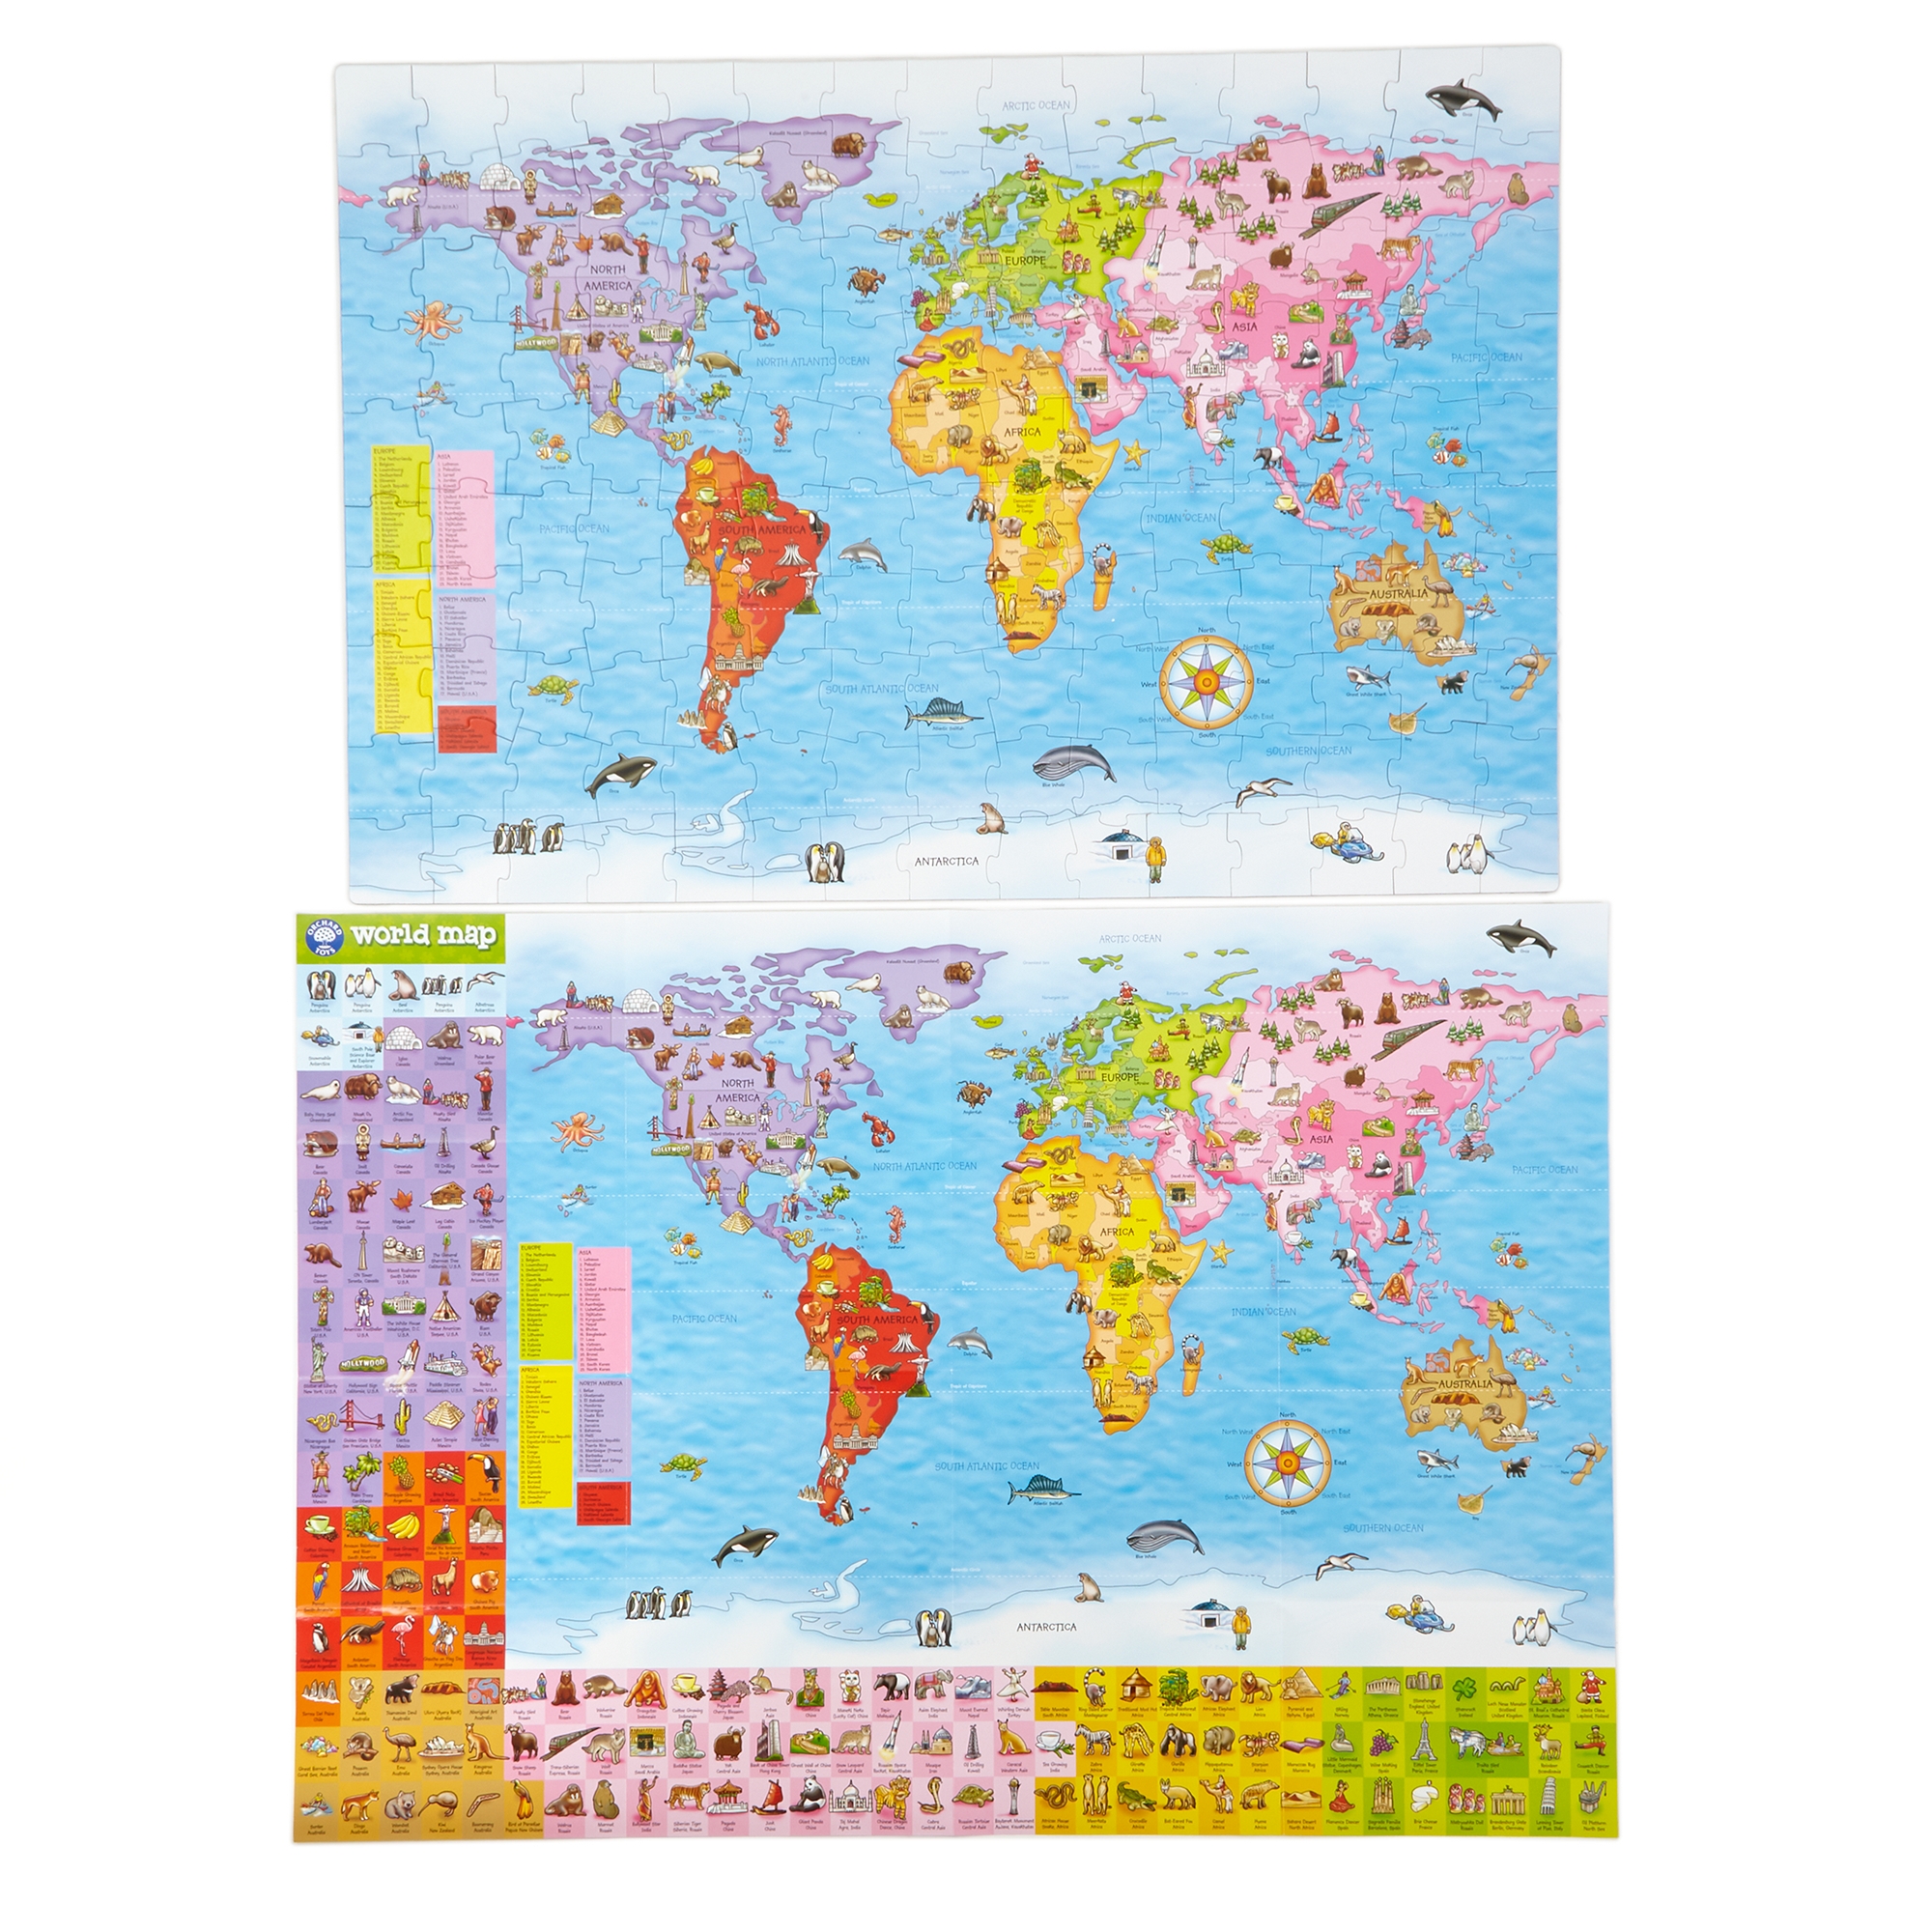 World Map Puzzle and Poster